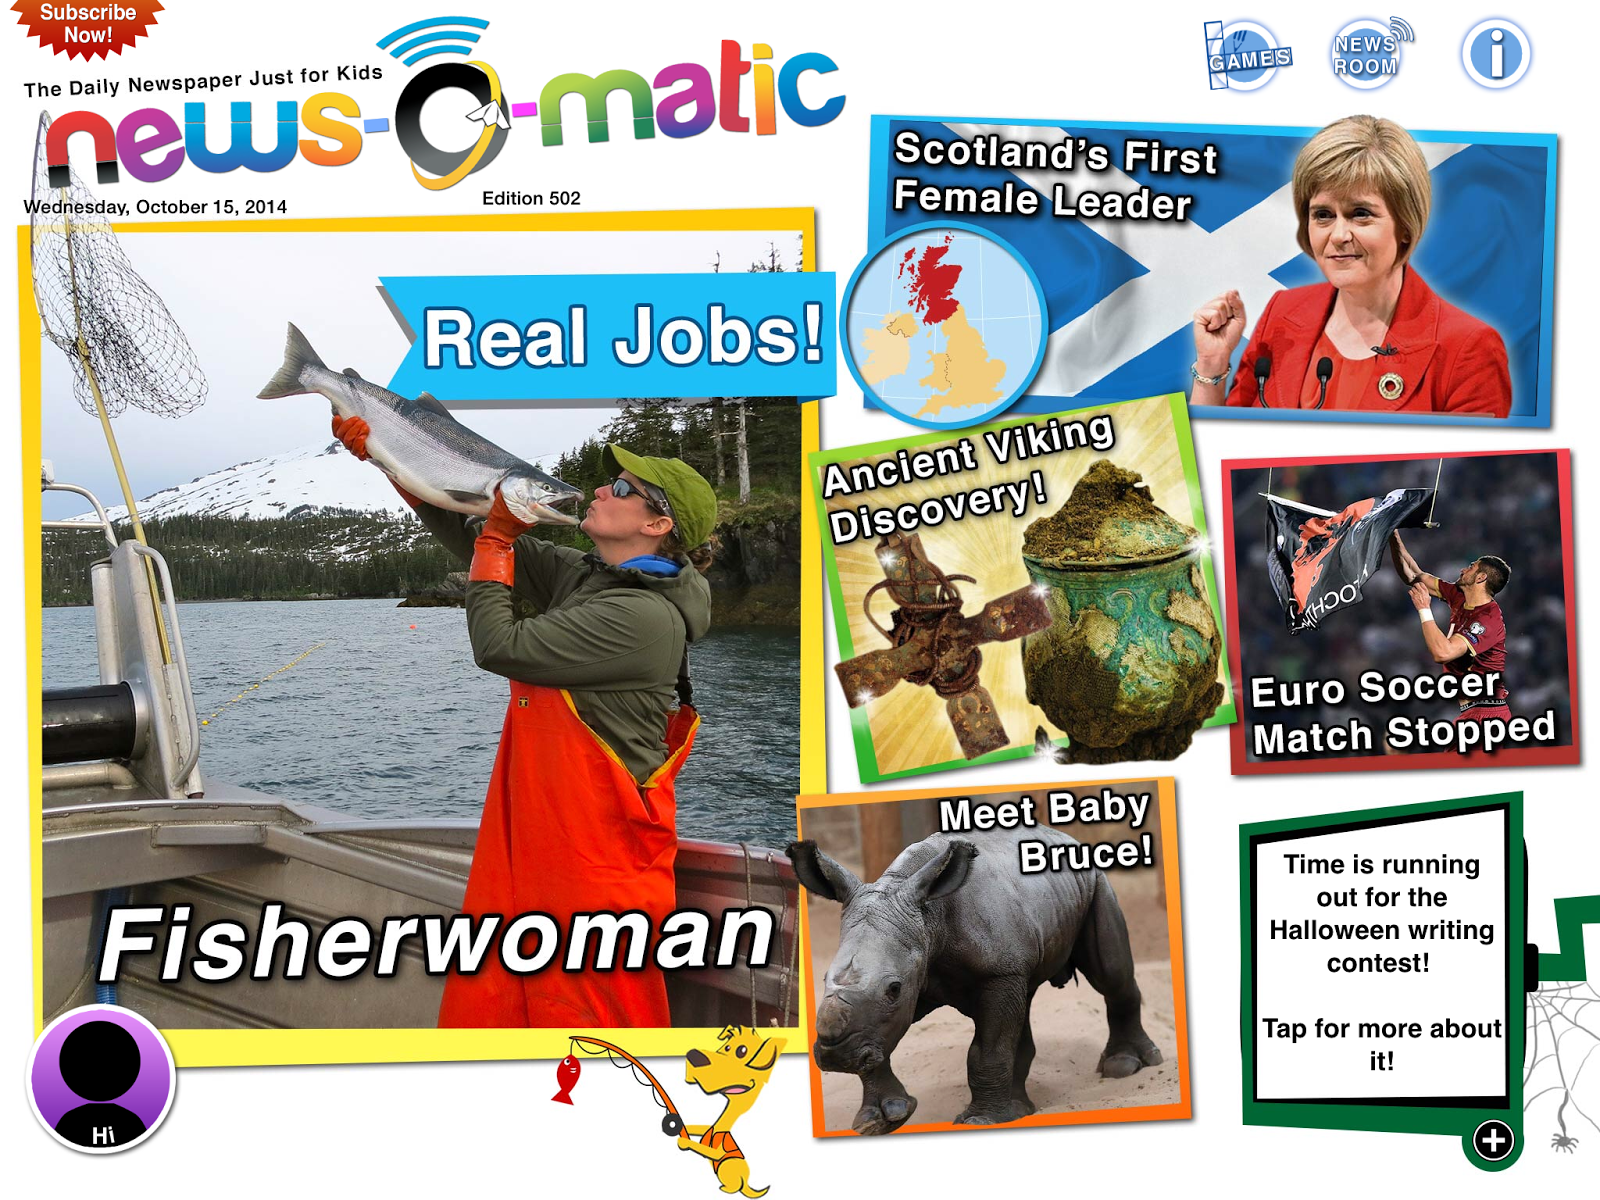 Jen Pickett: Real Jobs news-O-matic feature; Not all fishermen are